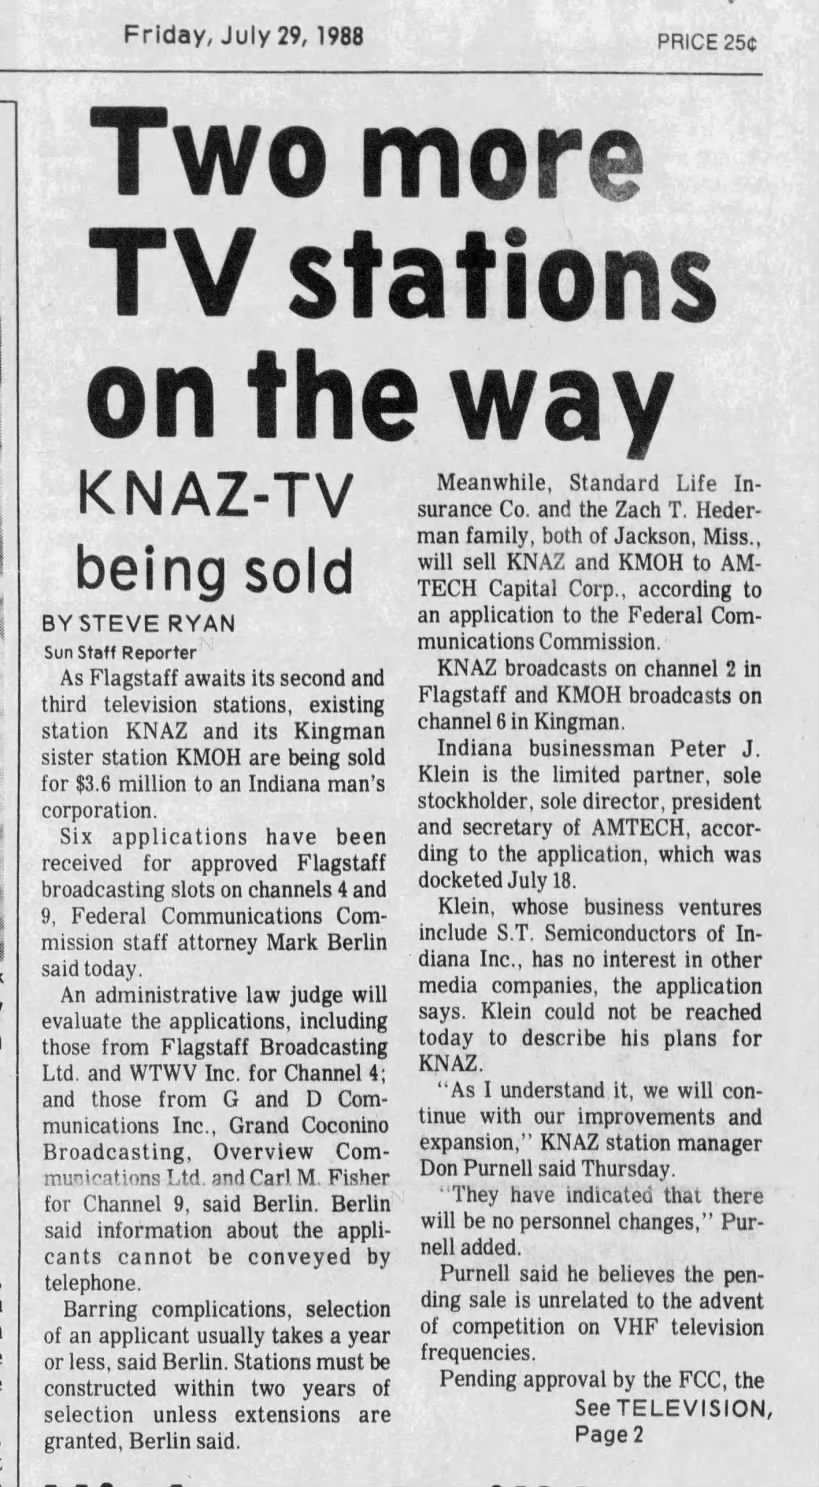 Two more TV stations on the way: KNAZ-TV being sold